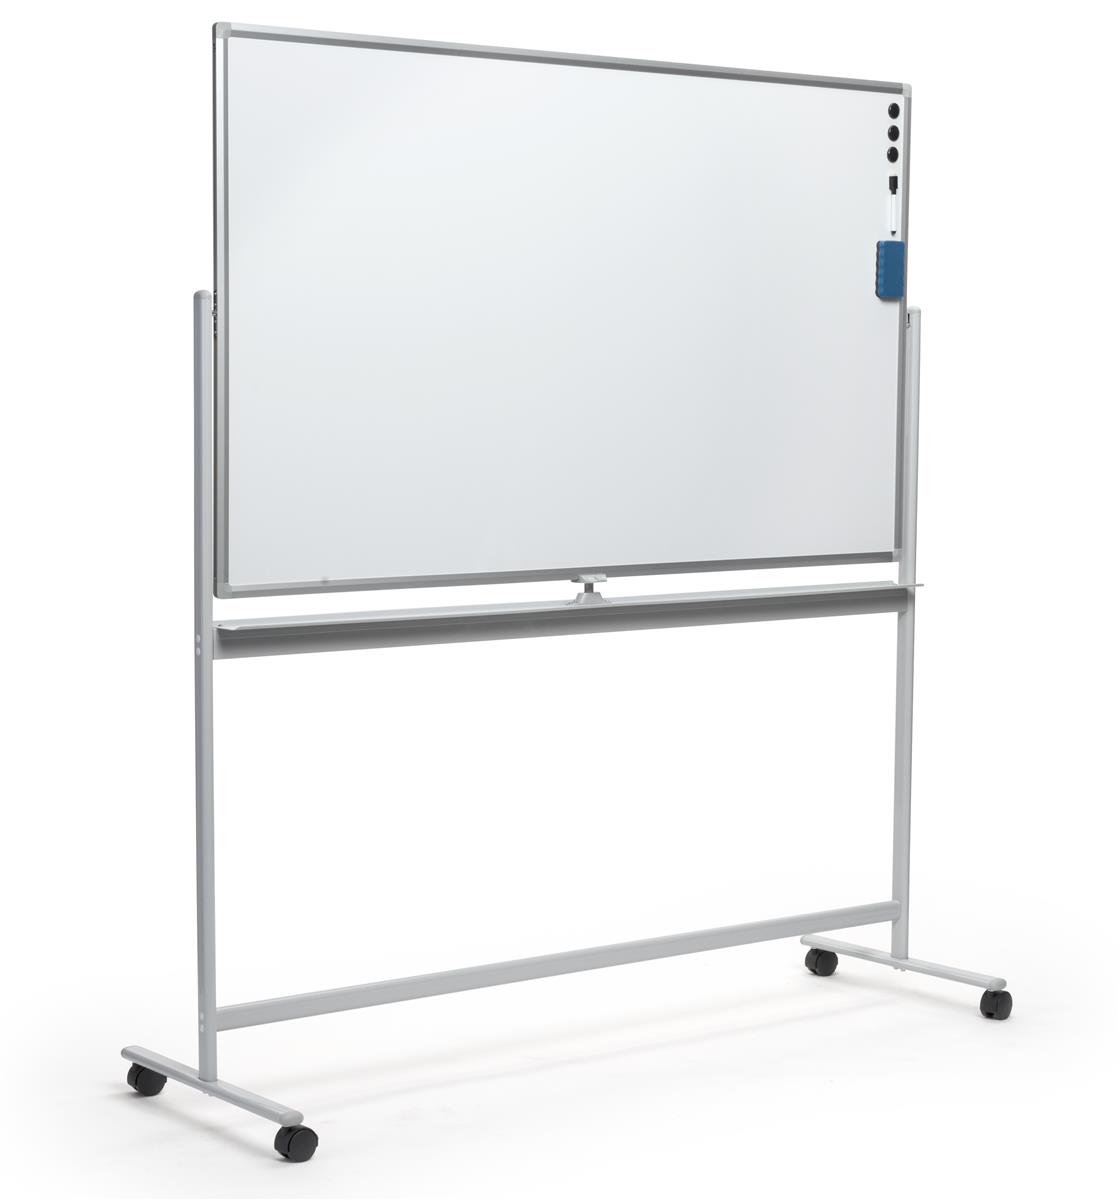 Magnetic White Board on Wheels Red Office Classroom Portable Easel with Stand Flip Chart Holders and Pad 60x46 Large Height Adjust 360° Rolling Double Sided Dry Erase Board Mobile Whiteboard 